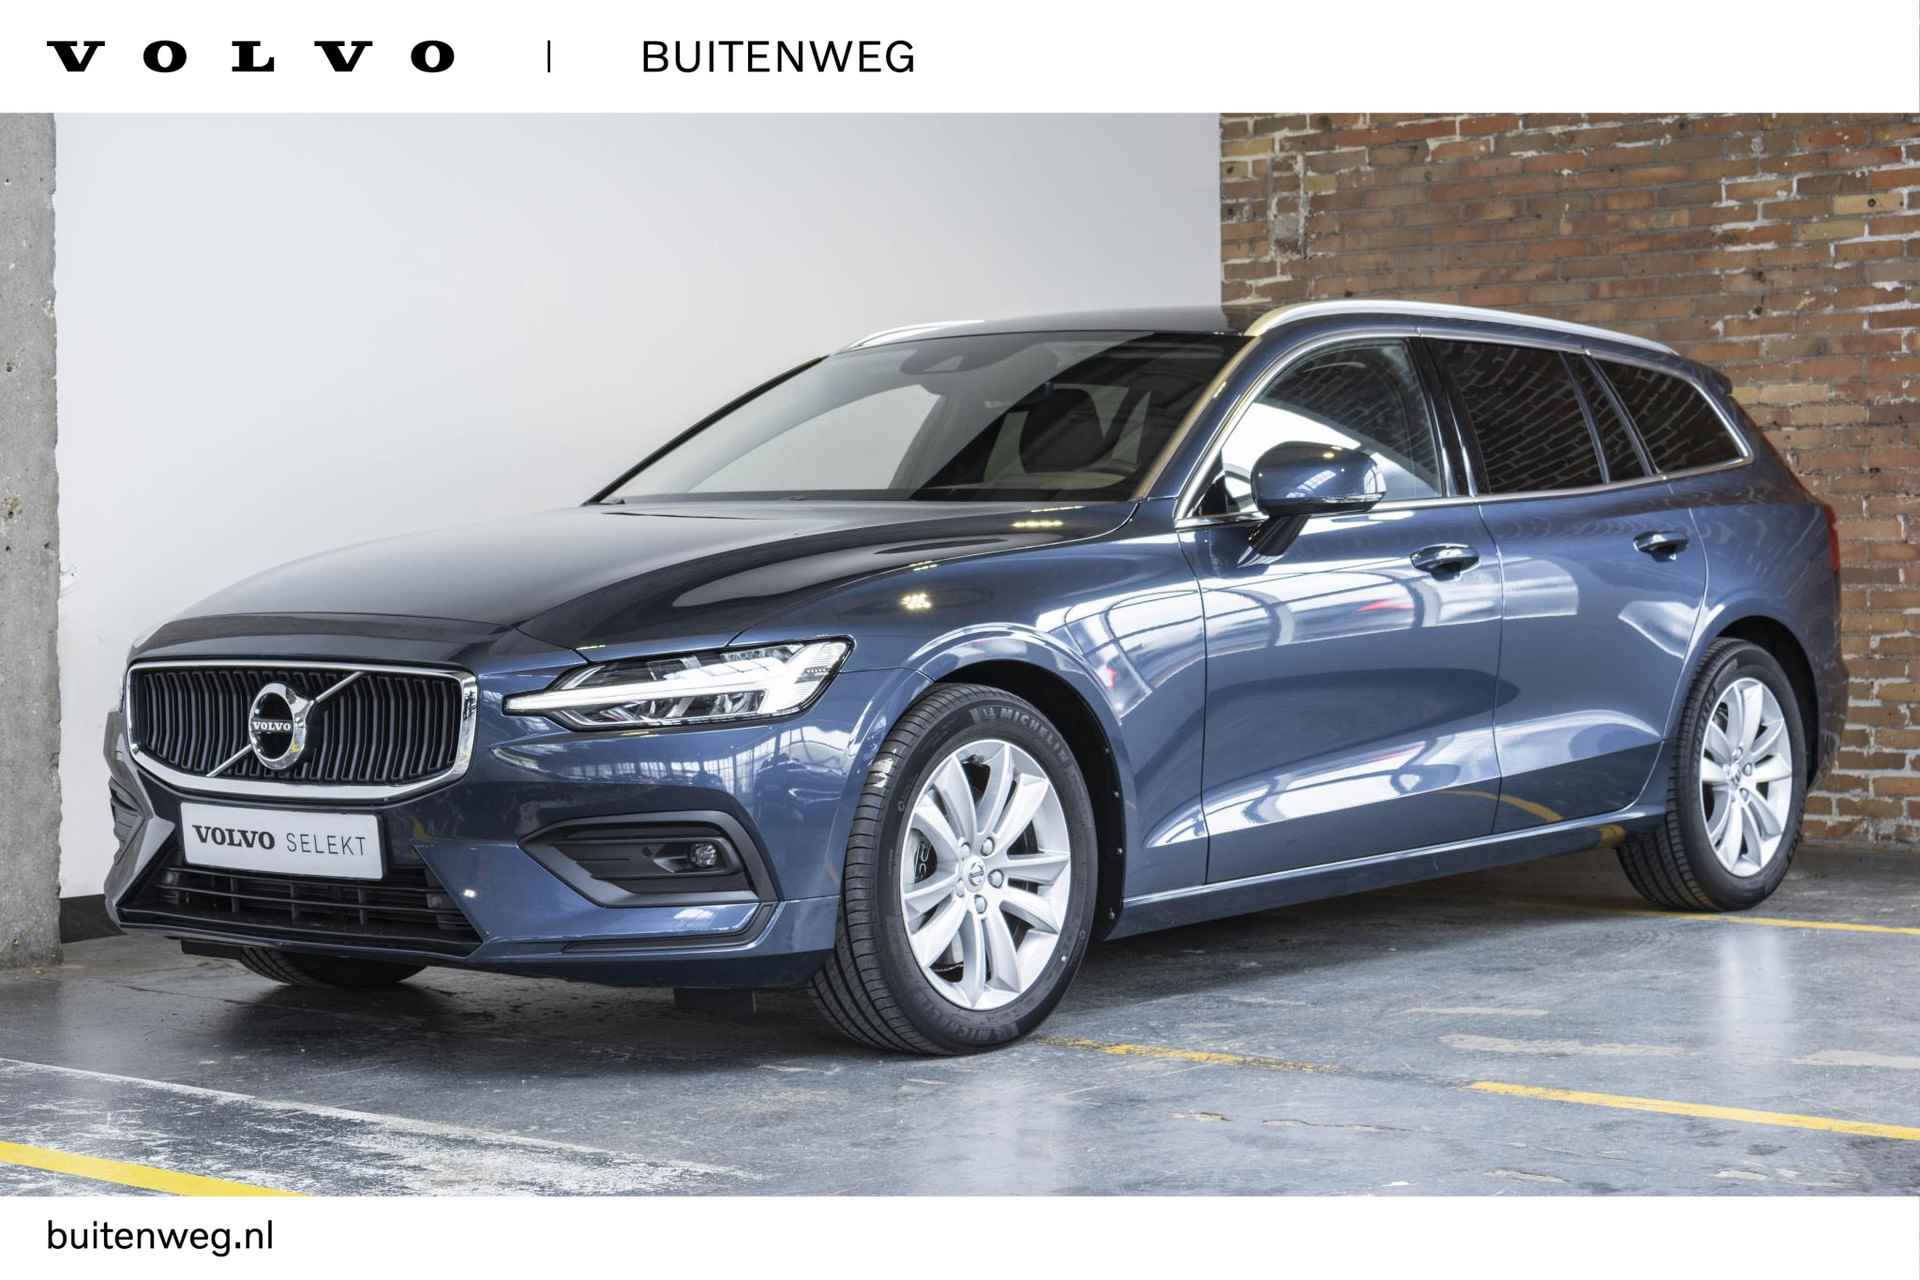 Volvo V60 B4 Automaat Business Pro | Blind Spot | Parkeercamera | Park Assist voor en achter | Adaptive cruise control | Extra getint glas | Keyless entree - 1/40